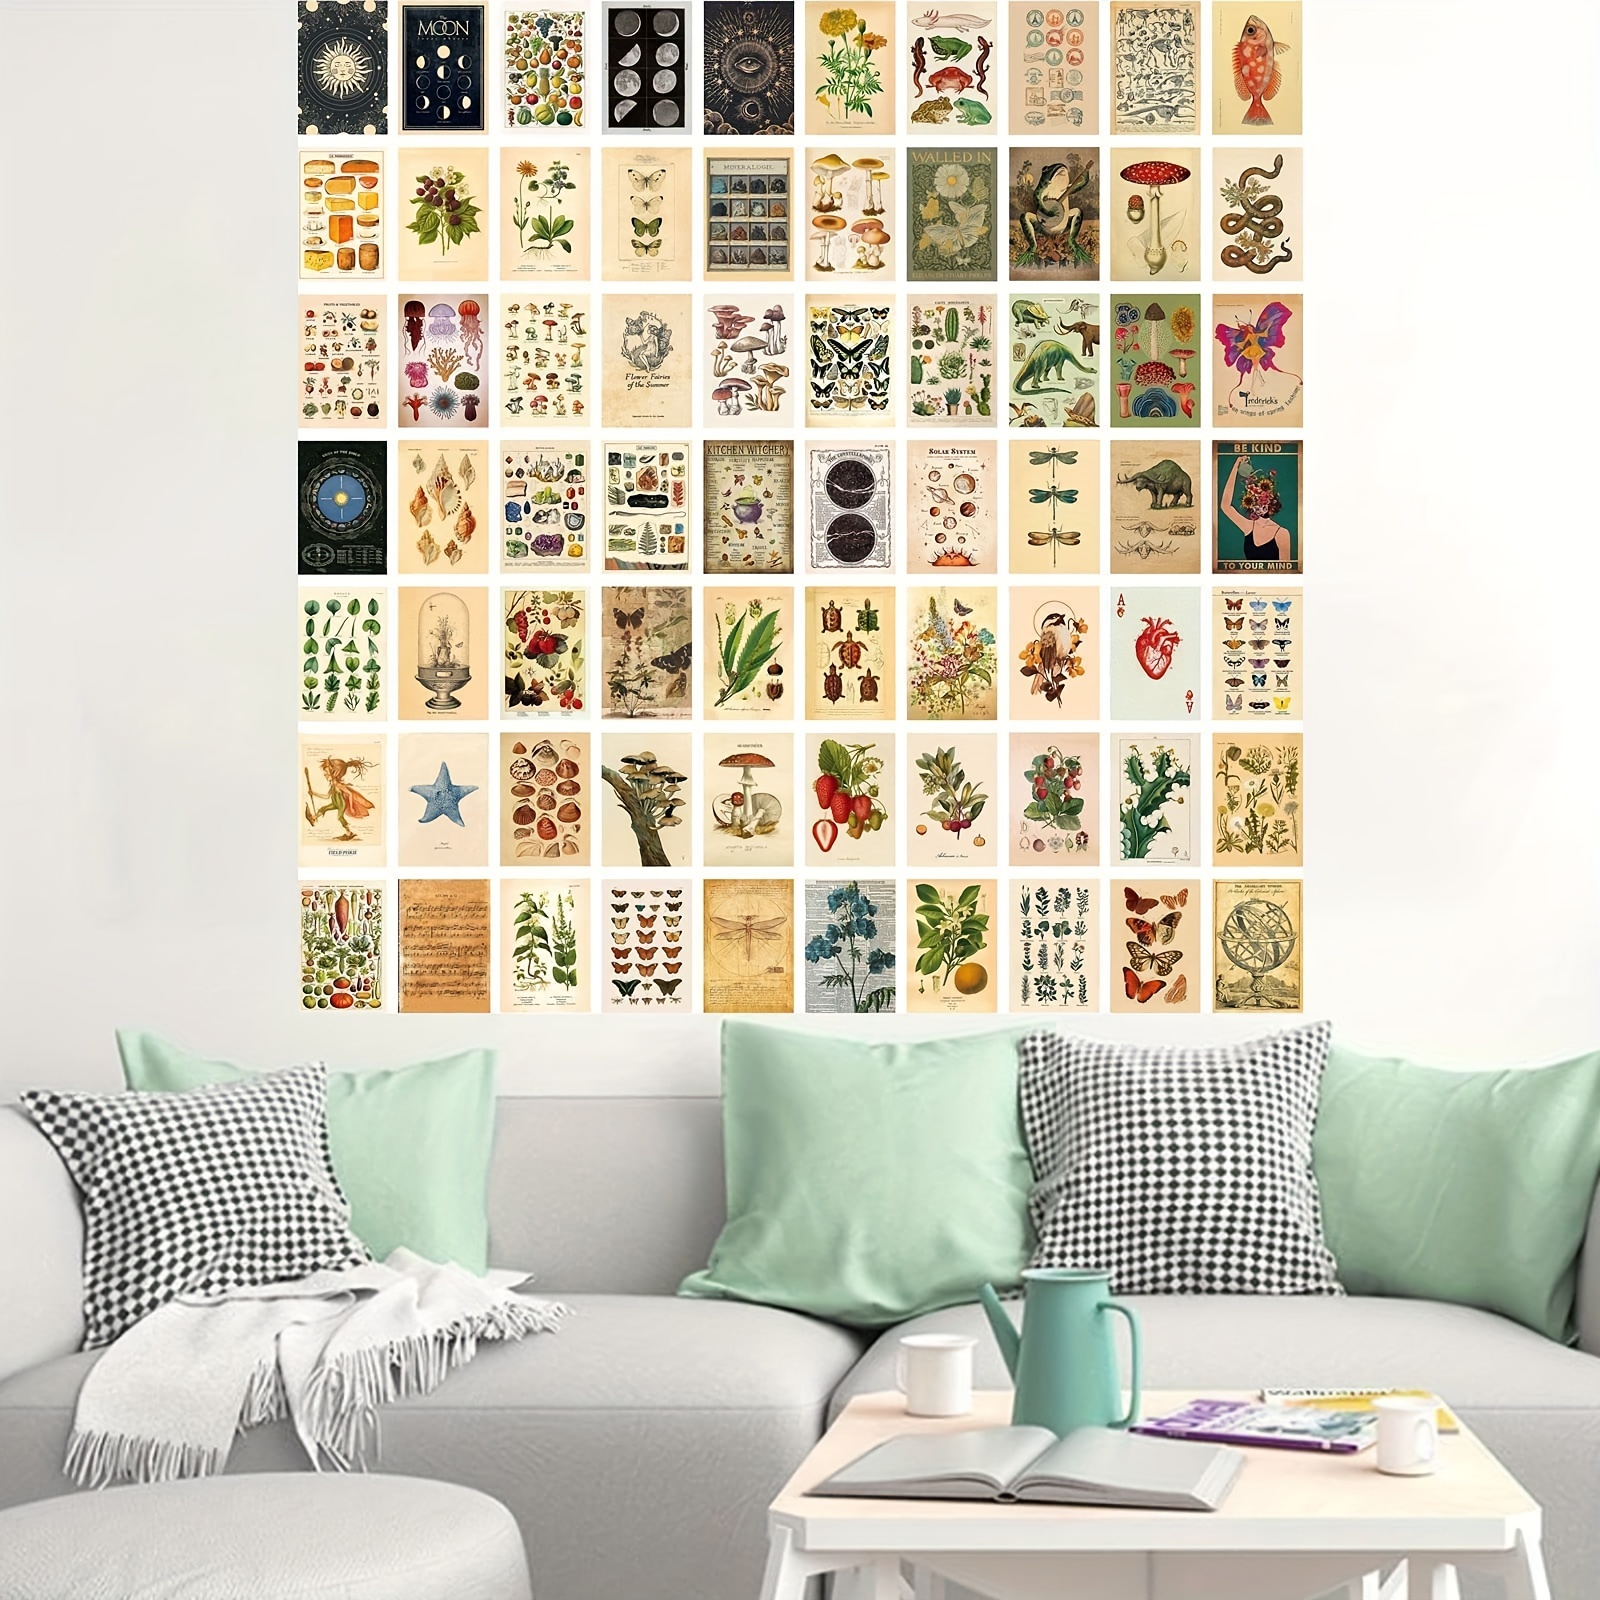 Indie Aesthetic Room Decor for Teens Bedroom- 70 PCs Wall Collage